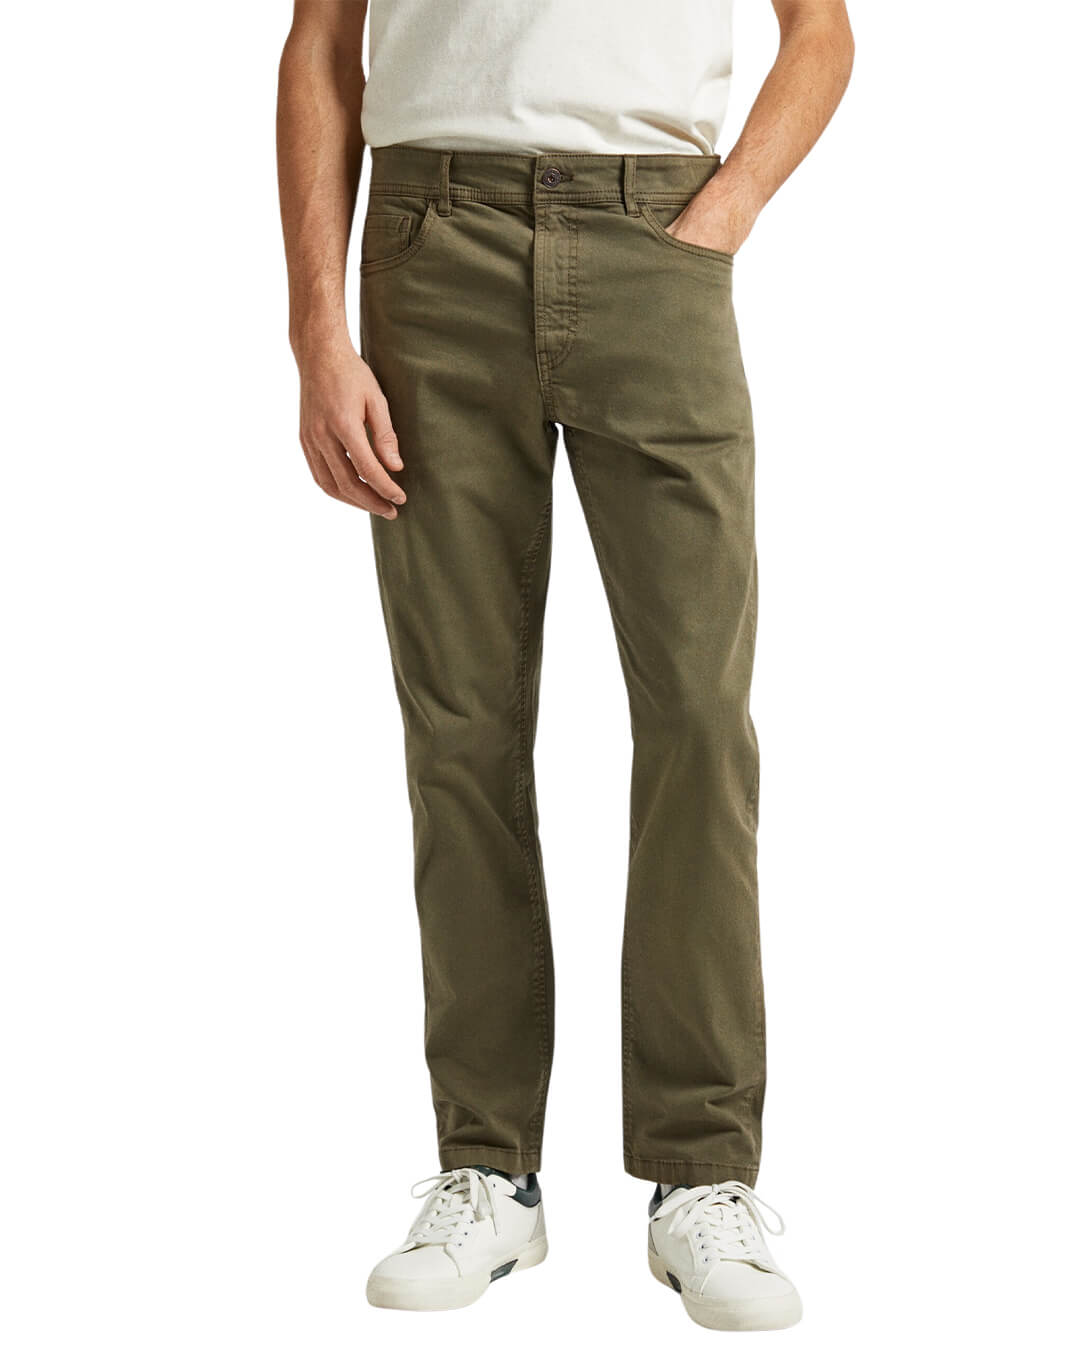 Pepe Jeans Trousers Pepe Jeans Green Slim Fit Five Pocket Trousers